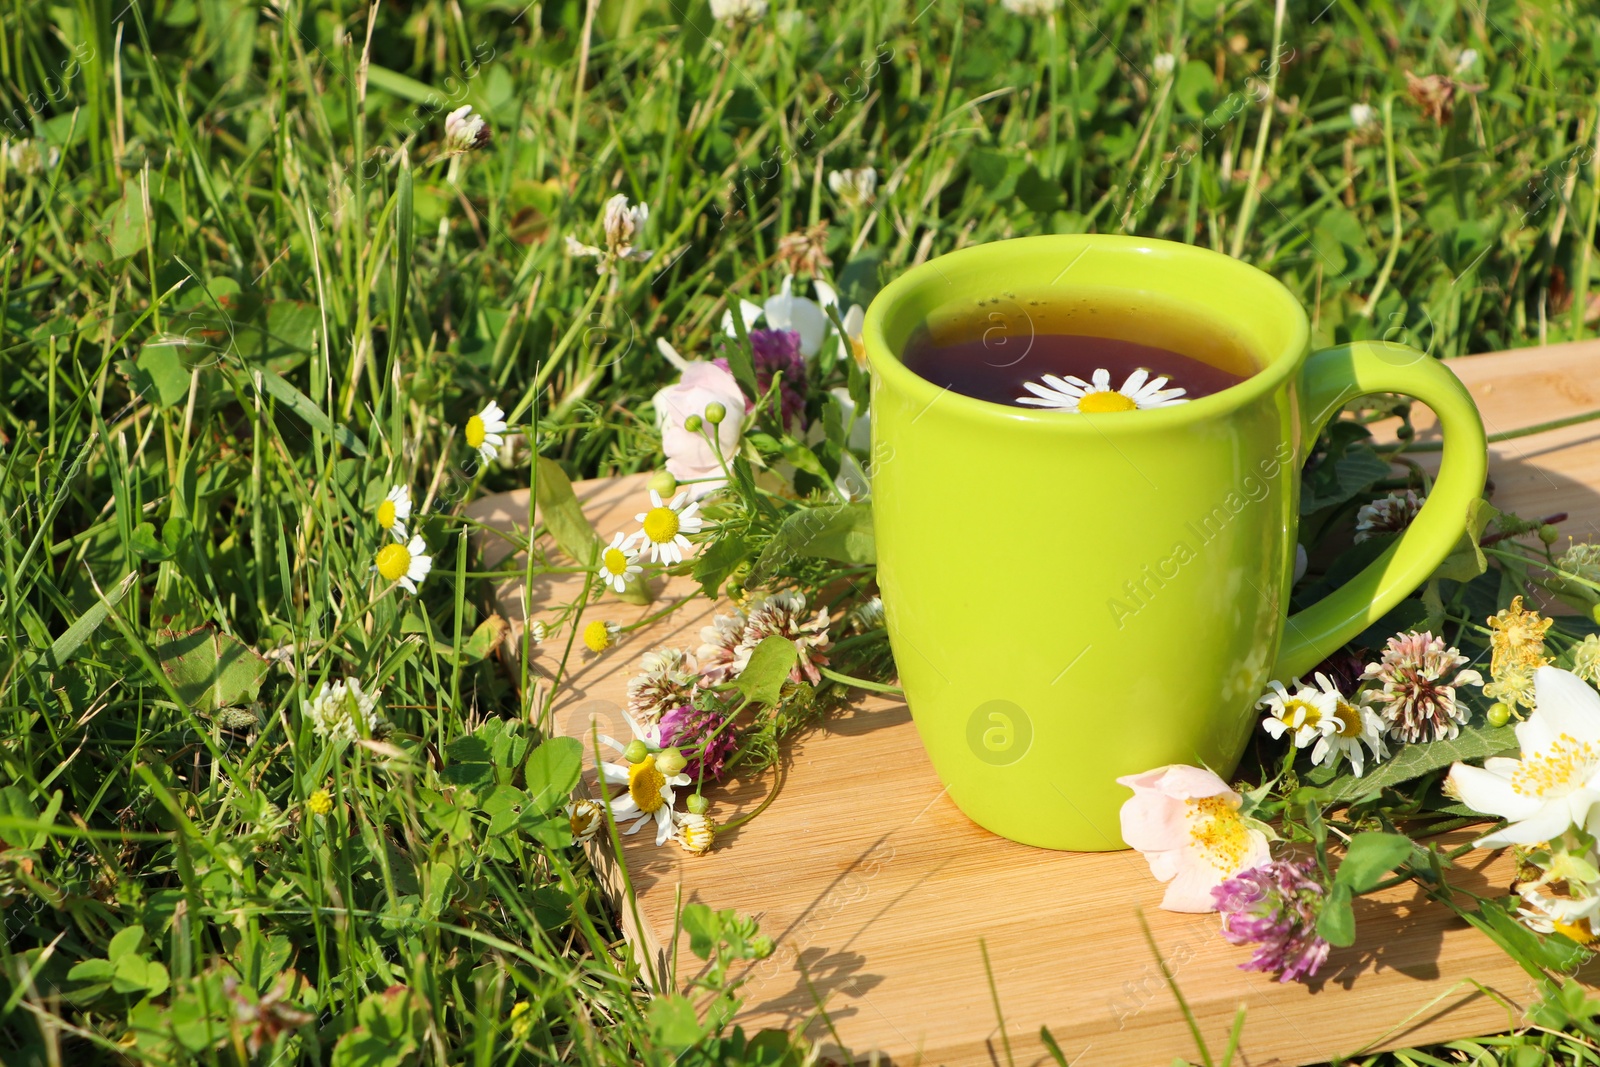 Photo of Green cup with tea, different wildflowers and herbs on wooden board in meadow. Space for text